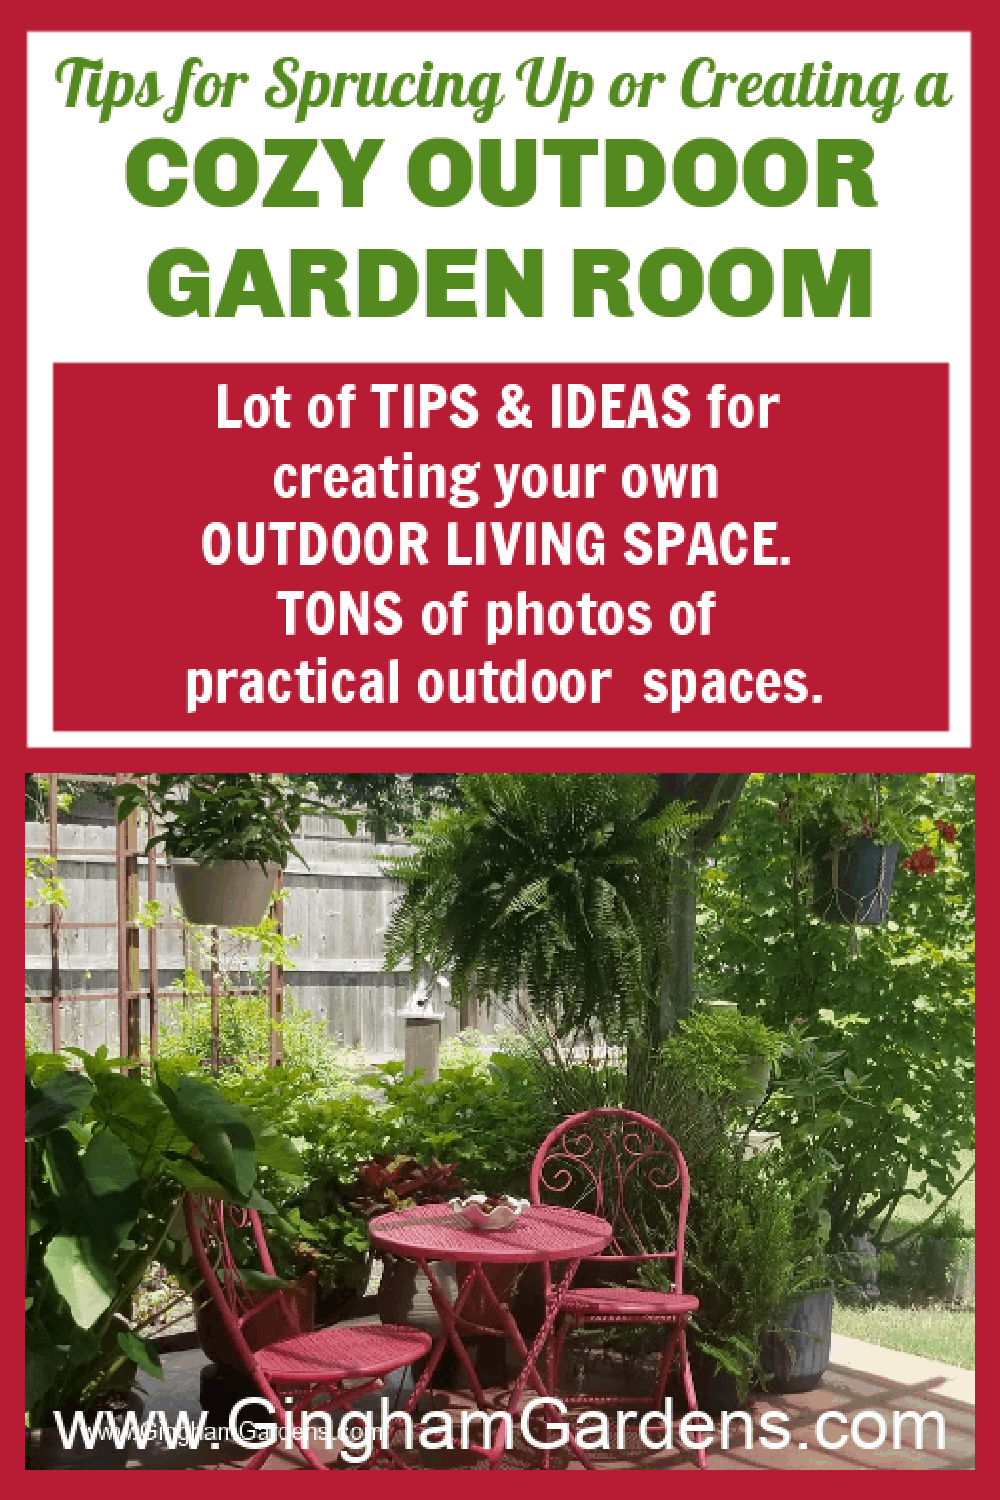 Image of a garden room with text overlay - tips for sprucing up or creating an outdoor garden room